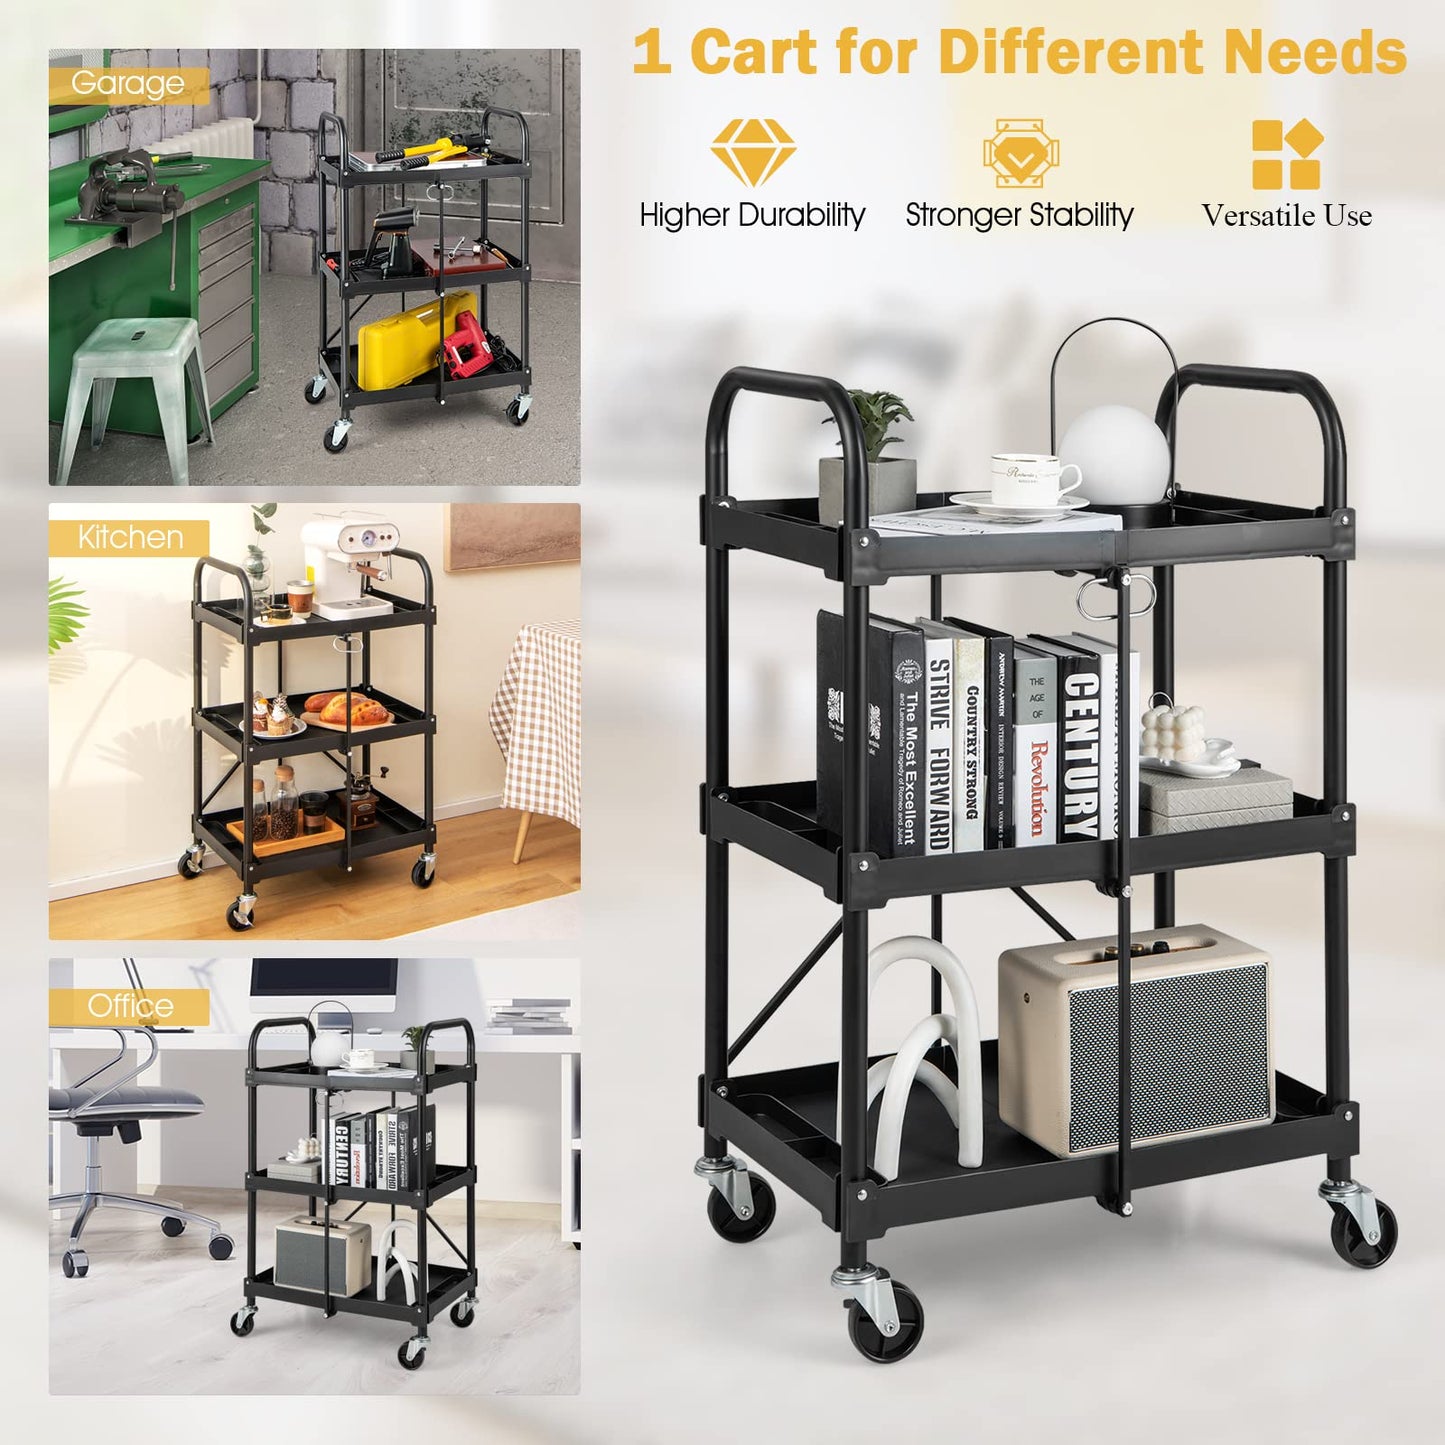 Goplus Folding Utility Cart, 3-Tier Rolling Tool Cart w/Lockable Wheels, 300LBS Capacity, Divided Storage Compartments, Collapsible Metal Service